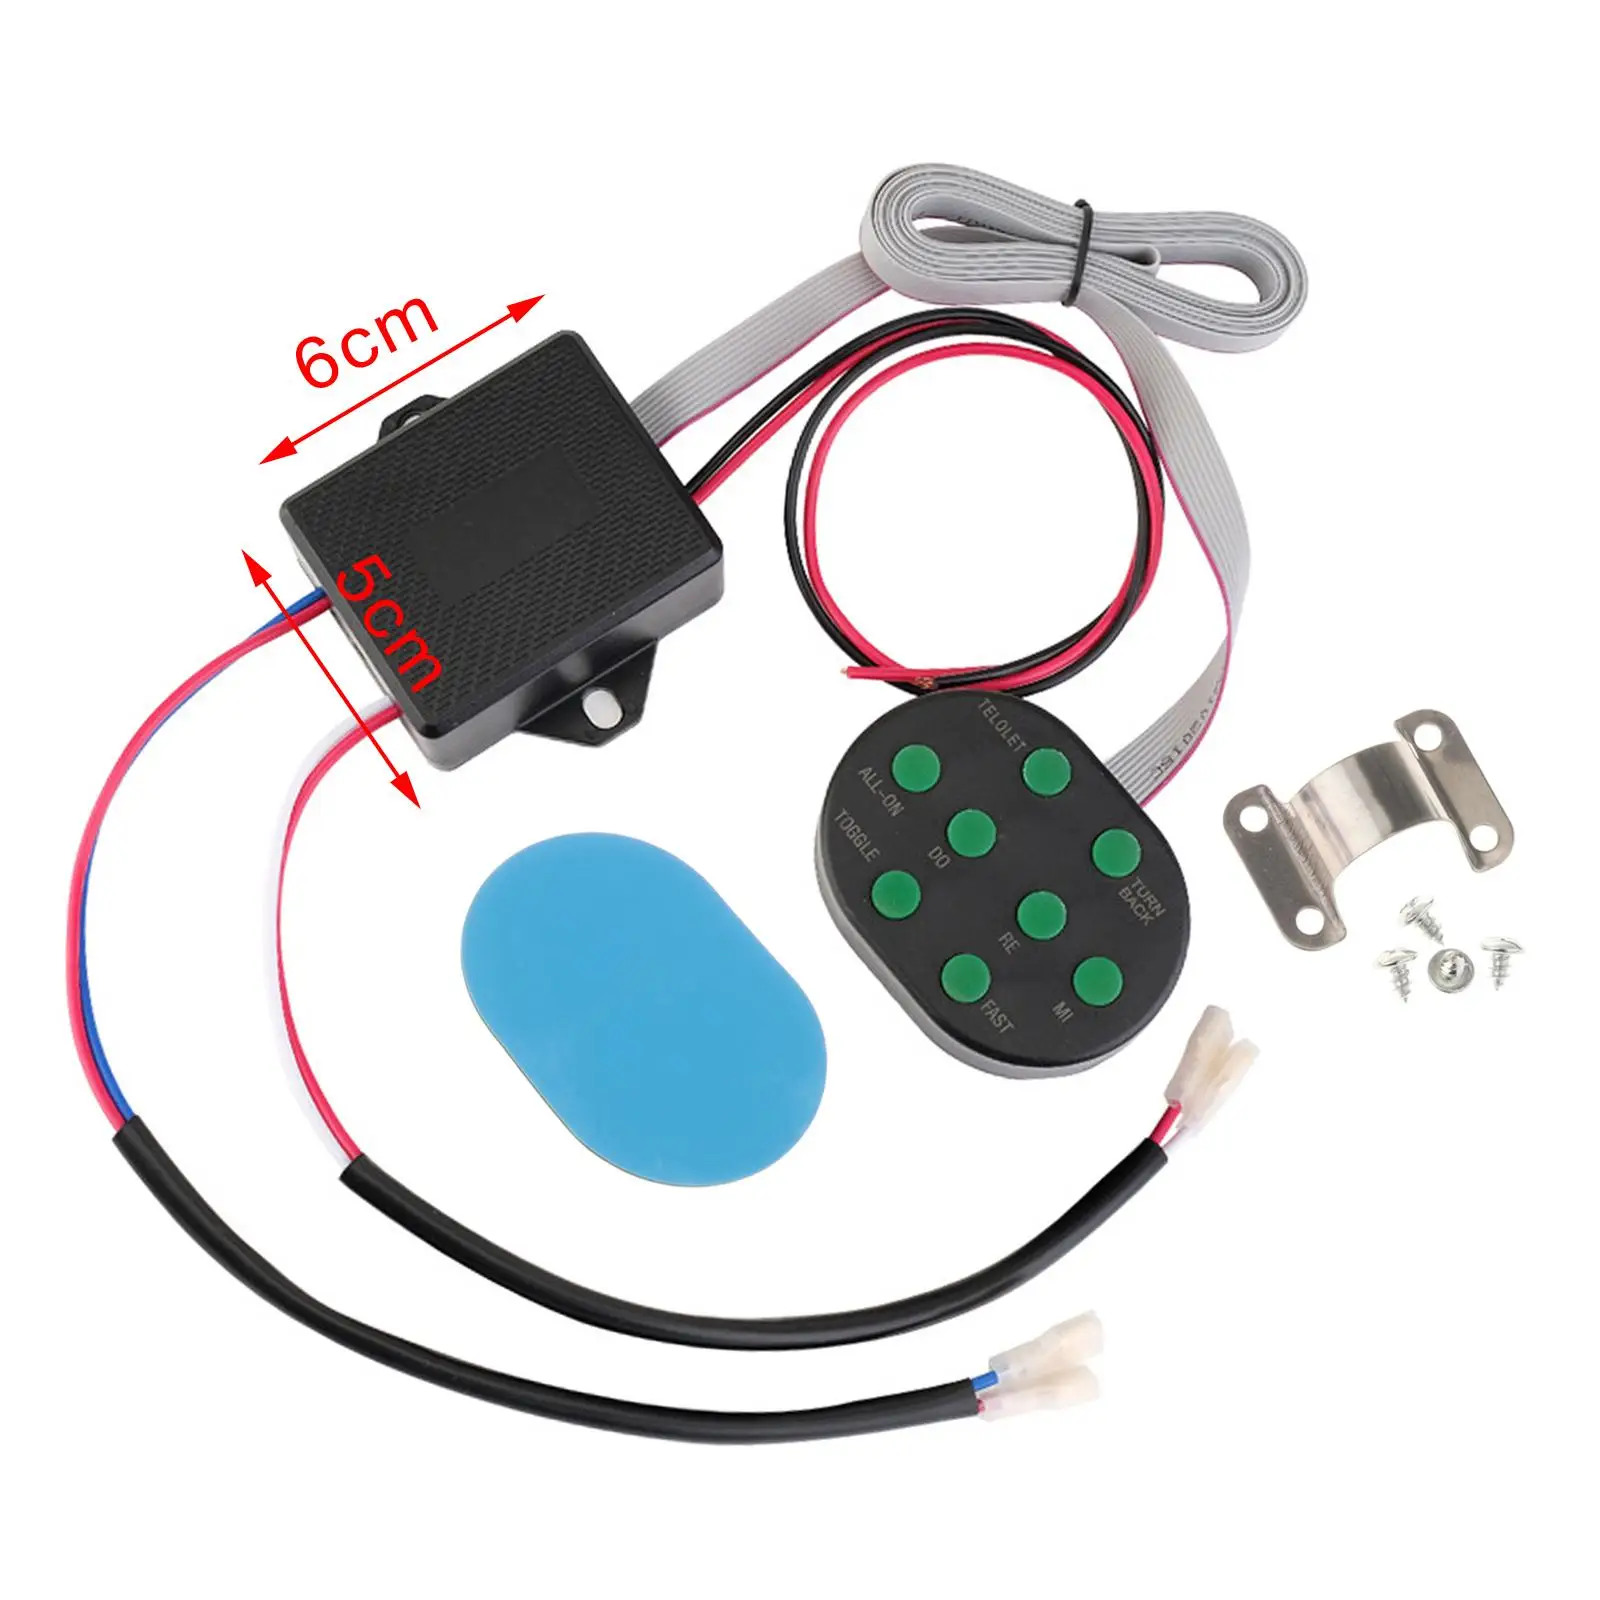 Car Horn Controller Electric Horn Controller 12V-24V Horn Sound Control Unit, Control Switch for Truck, Emergency Vehicles